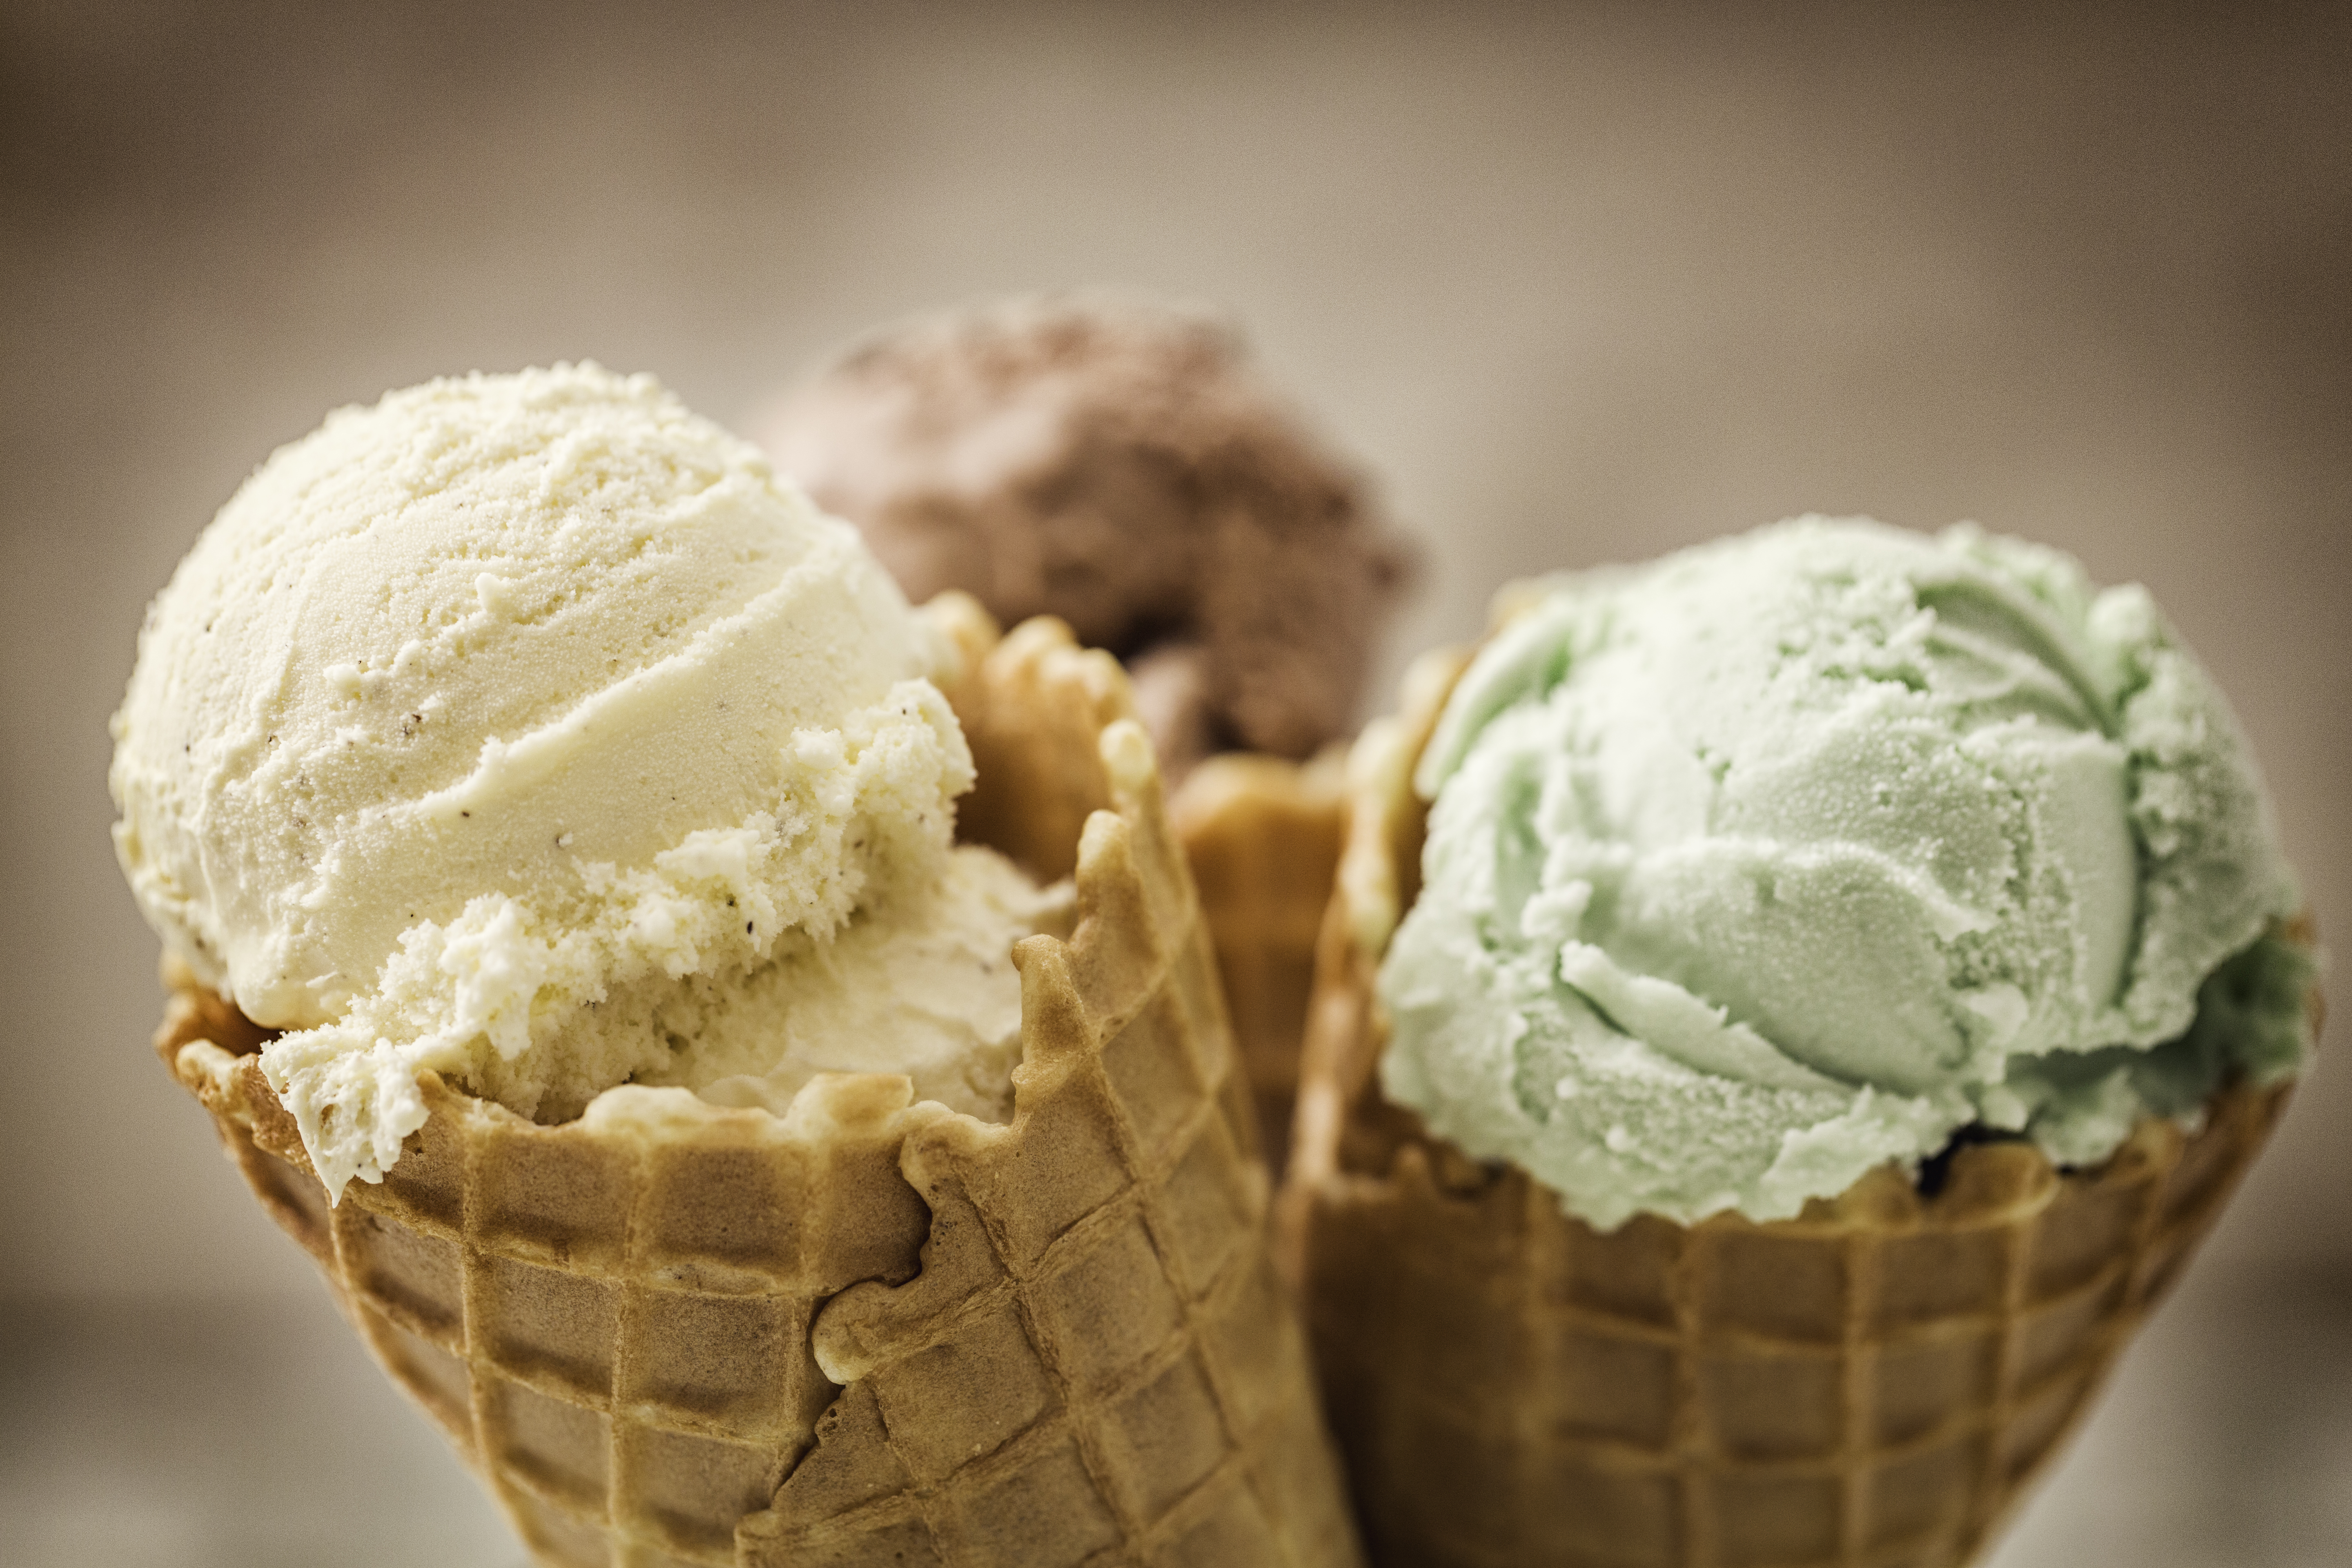 Can Ice Cream Cause Diarrhea: Exploring the Effects of Ice Cream on Digestion